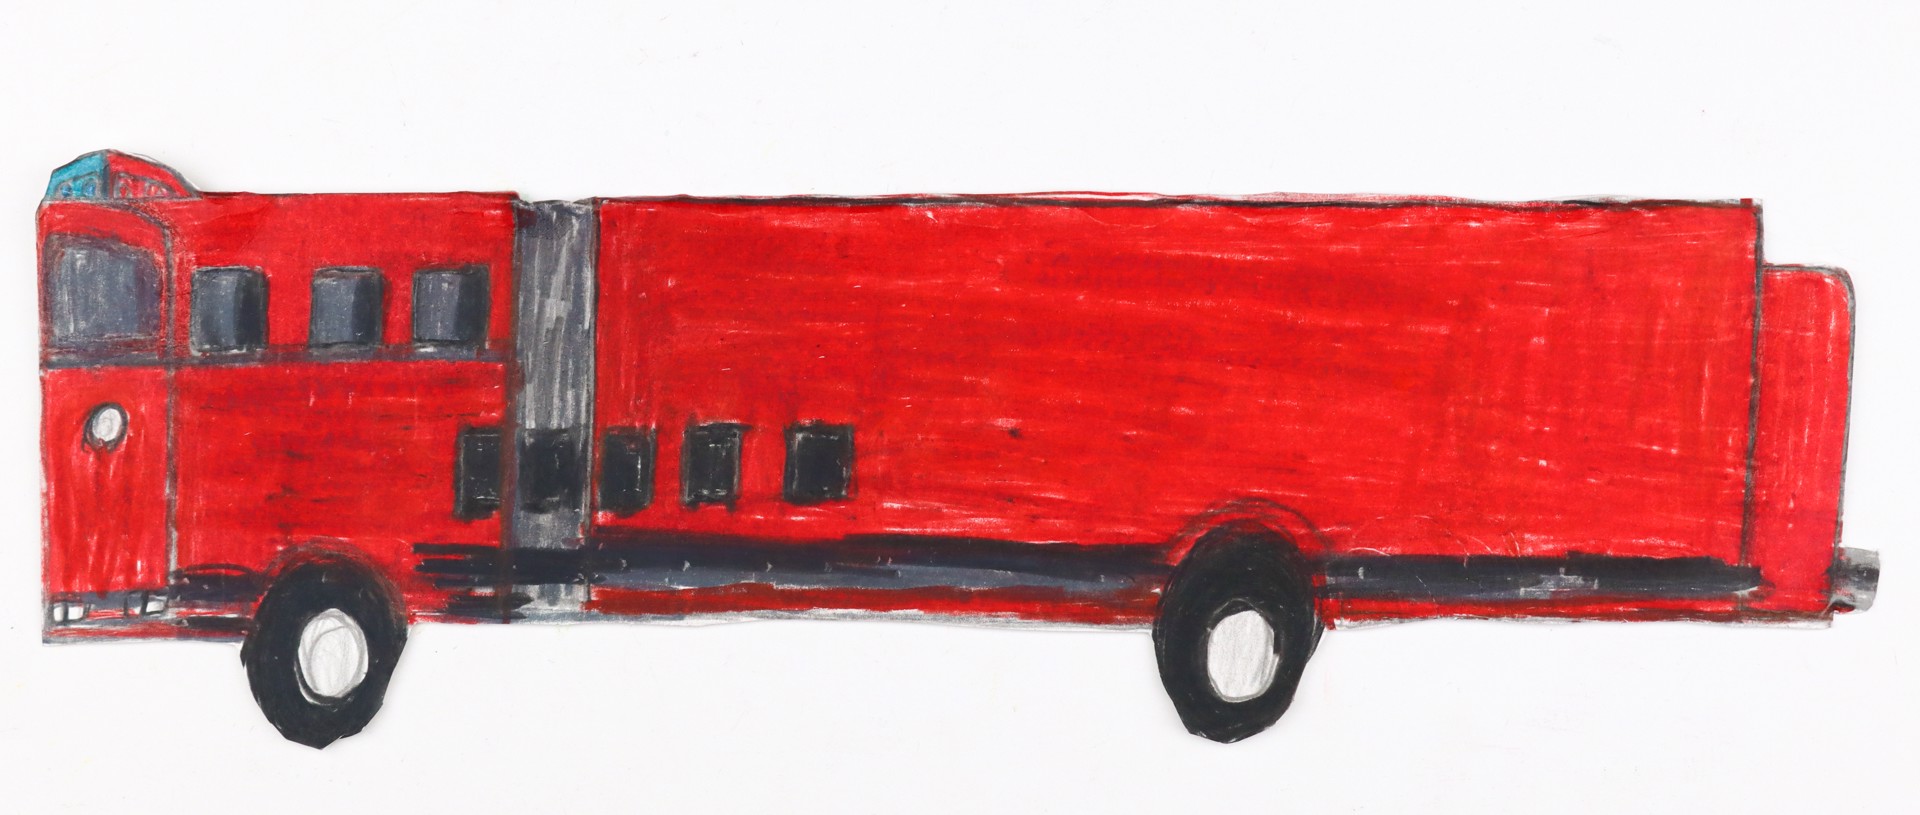 Red Fire Man Truck by Michael Haynes